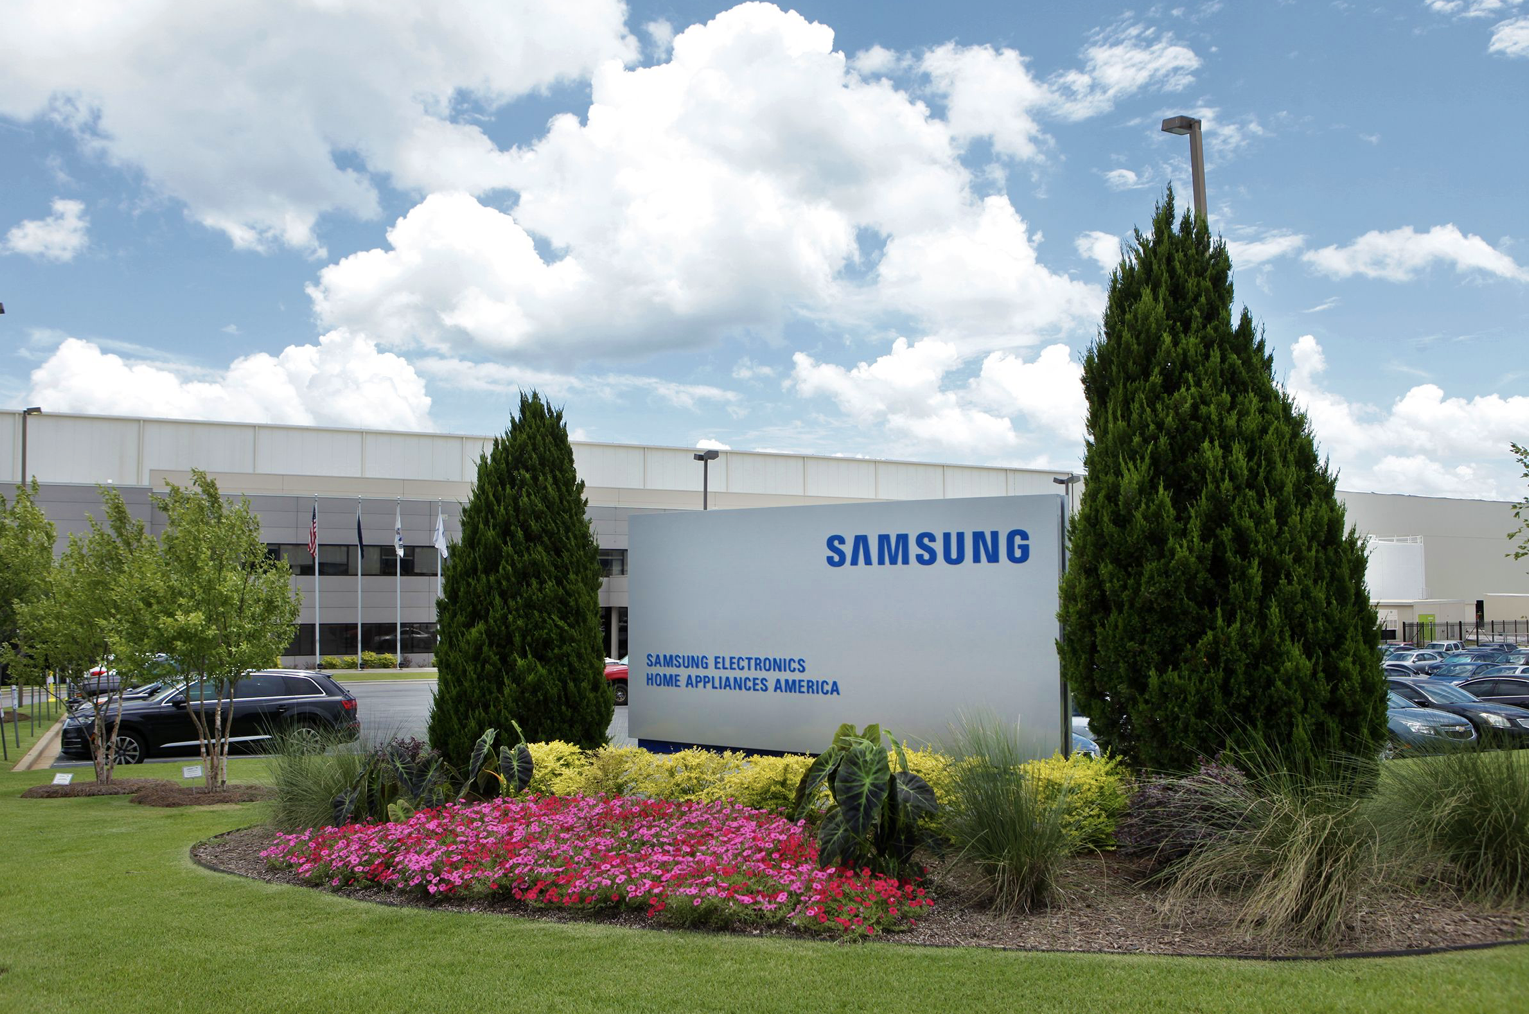 Samsung took a former Caterpillar generator plant and turned it into a state-of-the-art washing machine factory. Once the home of about 300 employees, it now employs more than 1,500 South Carolinians spread across a dozen or so counties. The factory manufactures about 1 million washing machines sold in the United States each year.